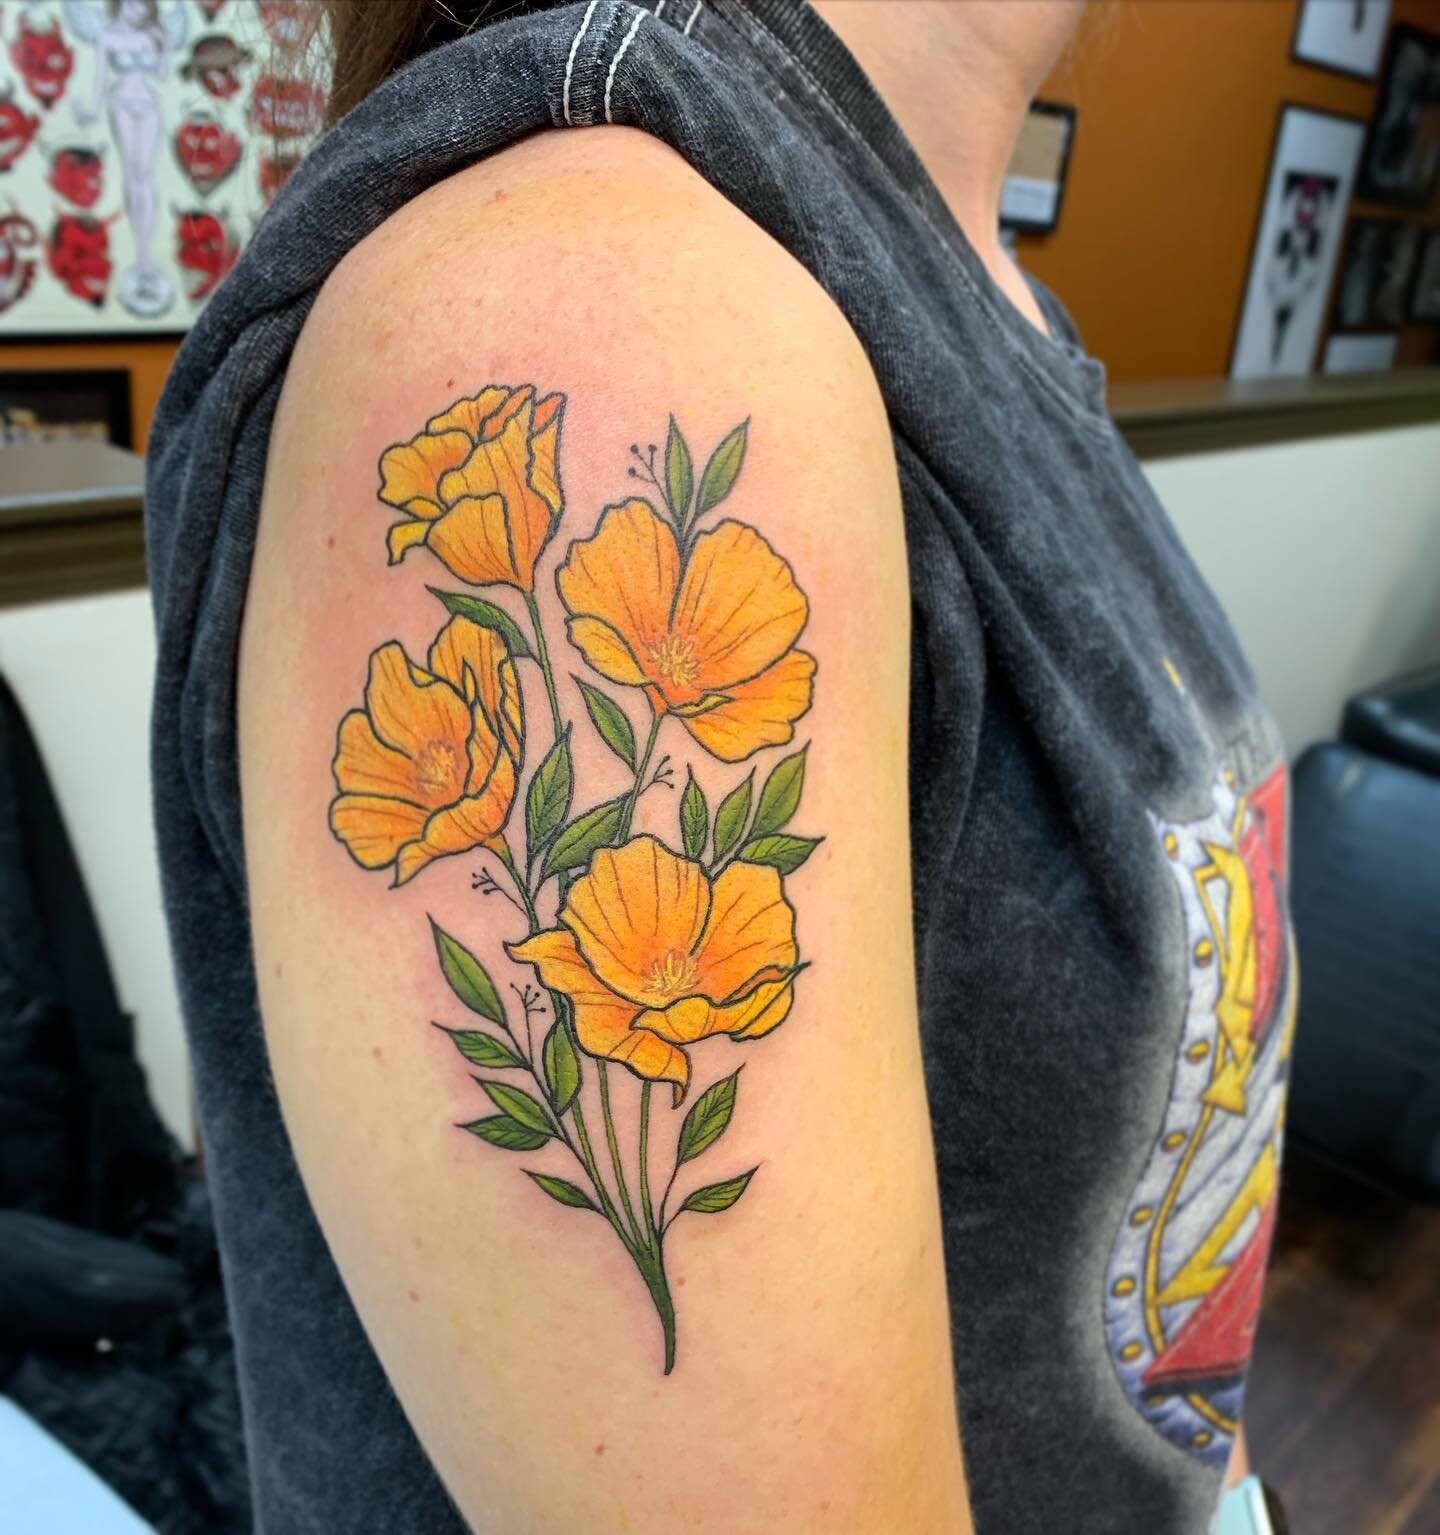 Blossoming into 2024 with vibrant California poppies! 🌼🧡✨ Use my booking form to secure your spot for some bright color pieces next year. Let's turn your vision into a masterpiece!🎨📆
.
.
.
.
.
.
#detroittattooartist #michiganmade #michigantattooe